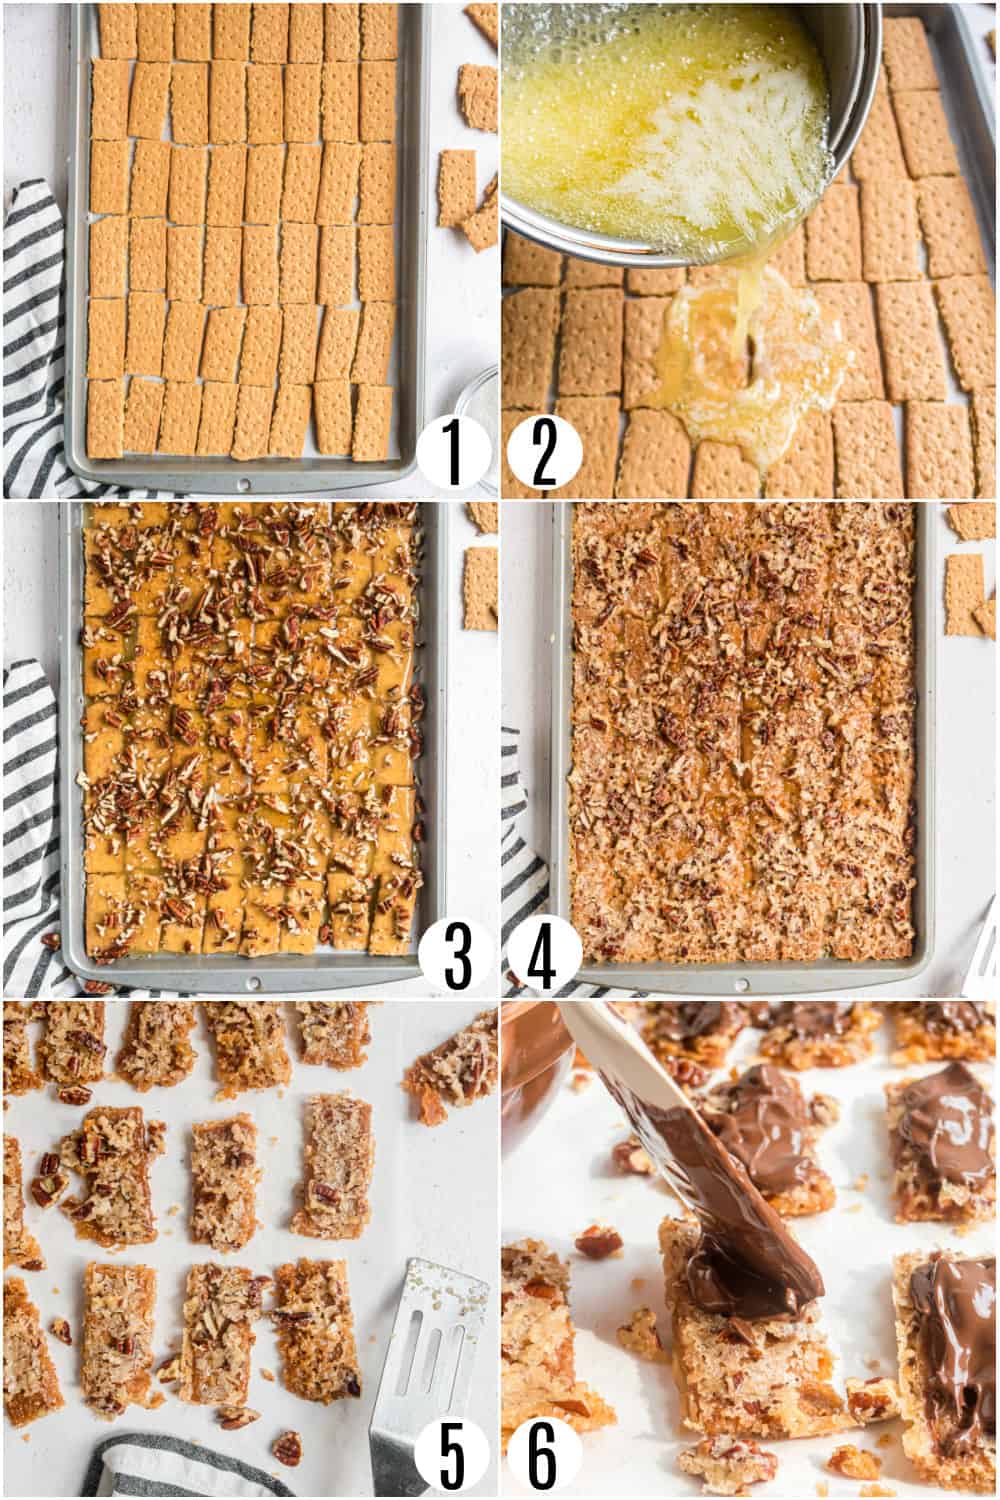 Step by step photos showing how to make graham cracker toffee.